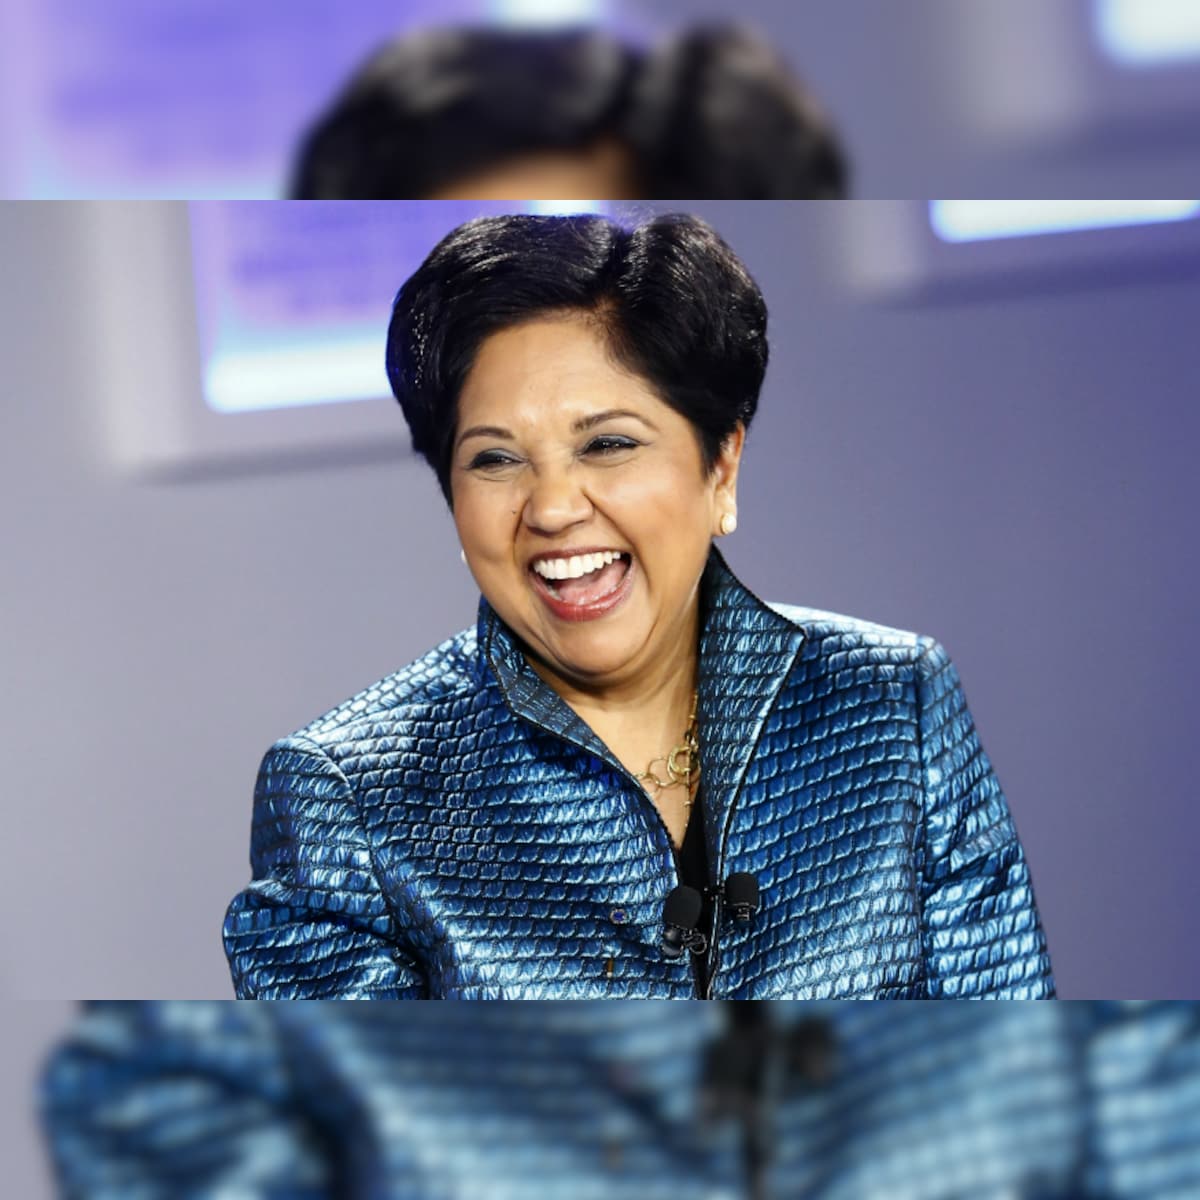 Former Pepsi CEO Indra Nooyi Becomes Second Woman to Join Amazon Board